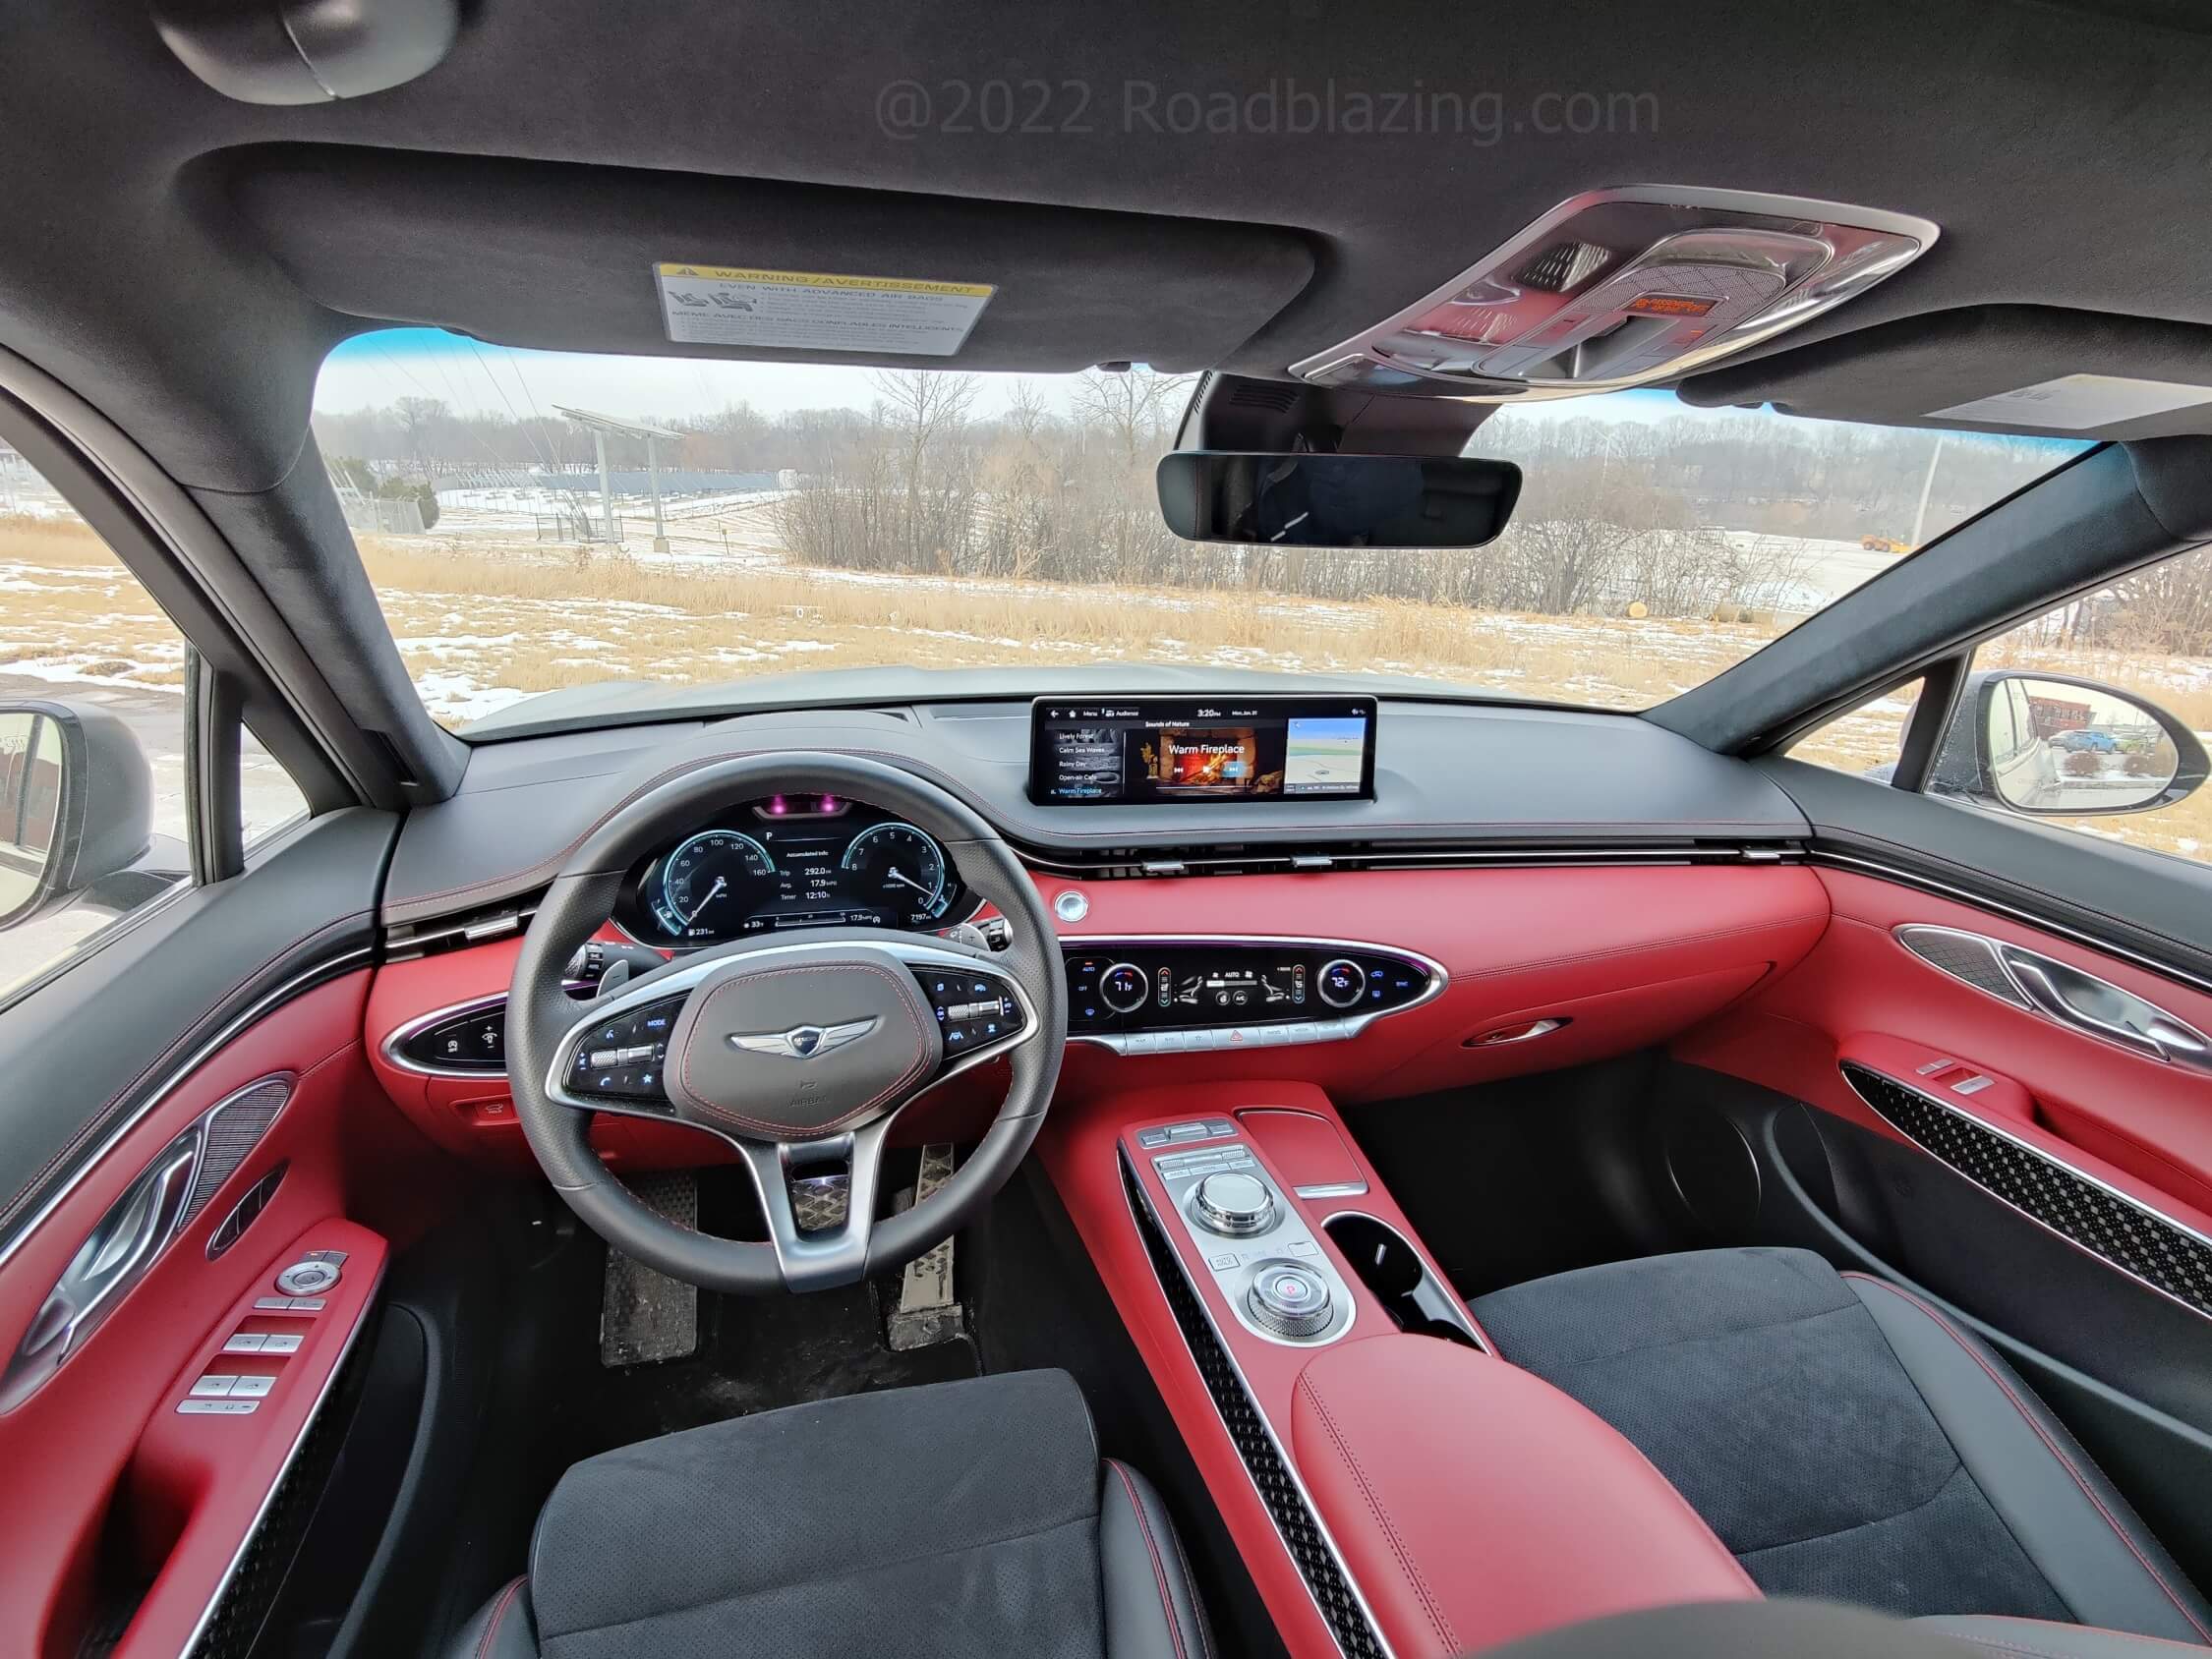 2022 Genesis GV70 3.5T AWD: Cabin filled with Sounds of Nature "Fireplace" crackling